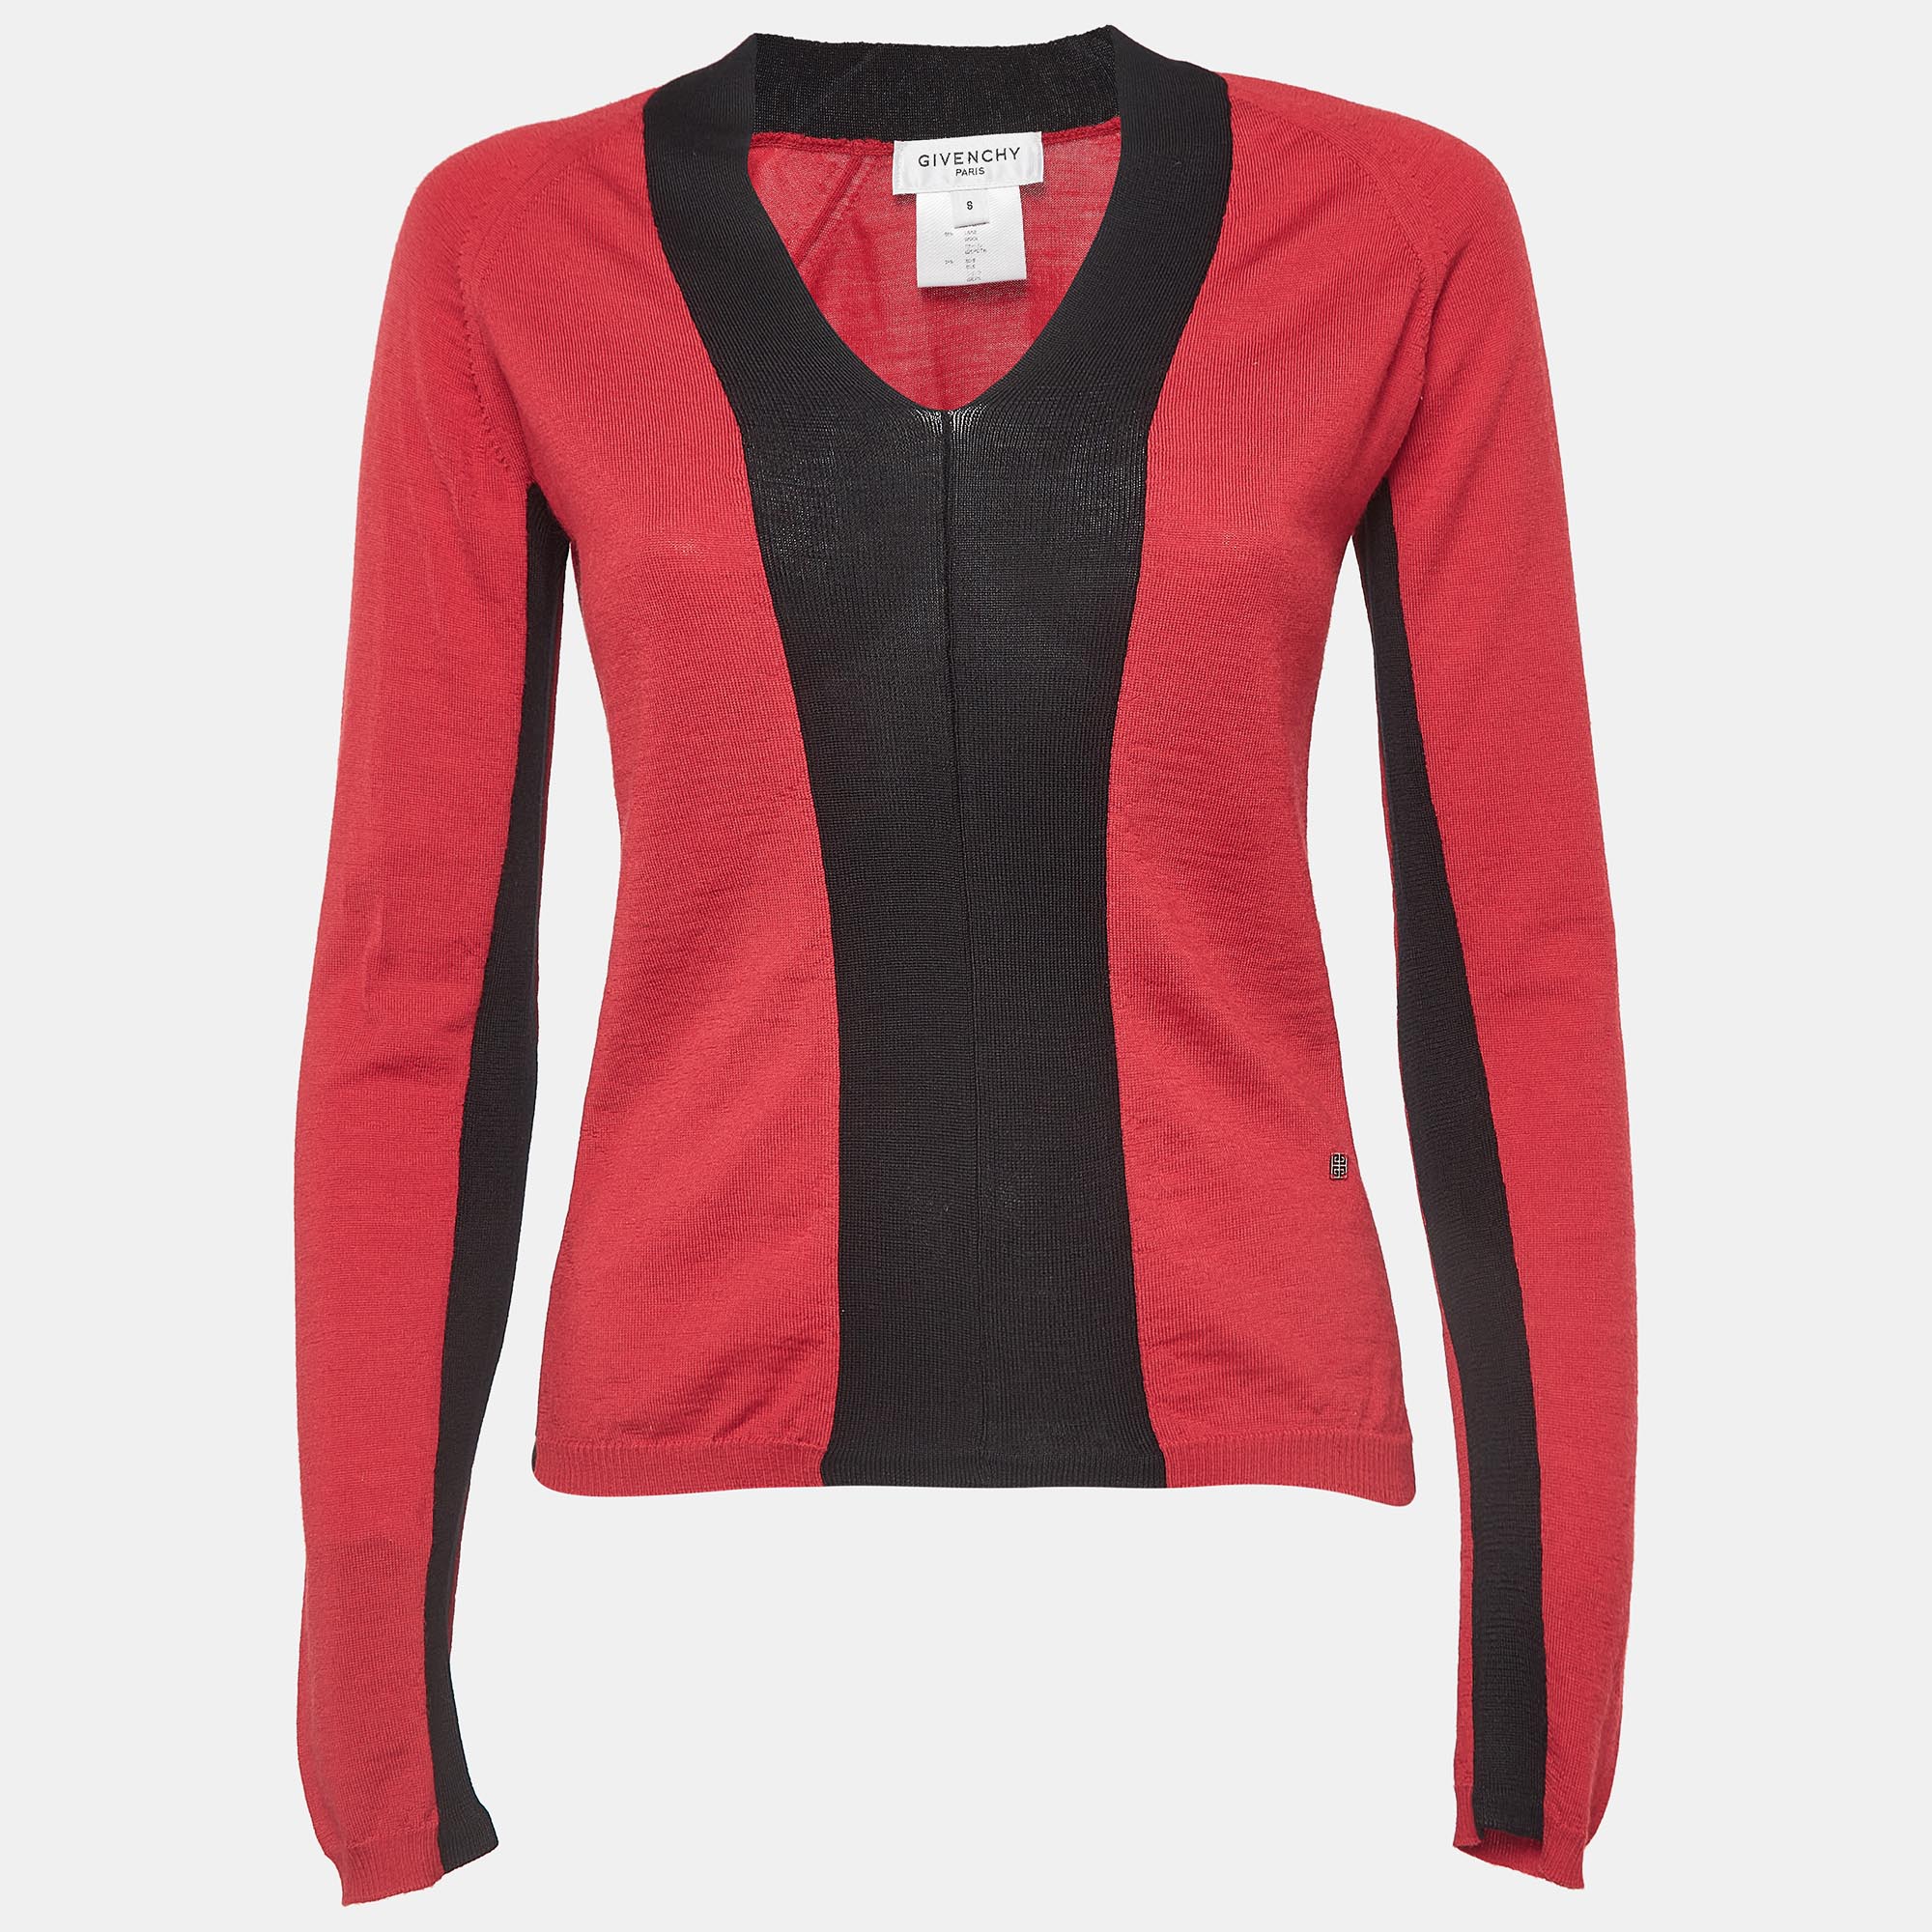 

Givenchy Red/Black Jersey Colorblock Sweatshirt S